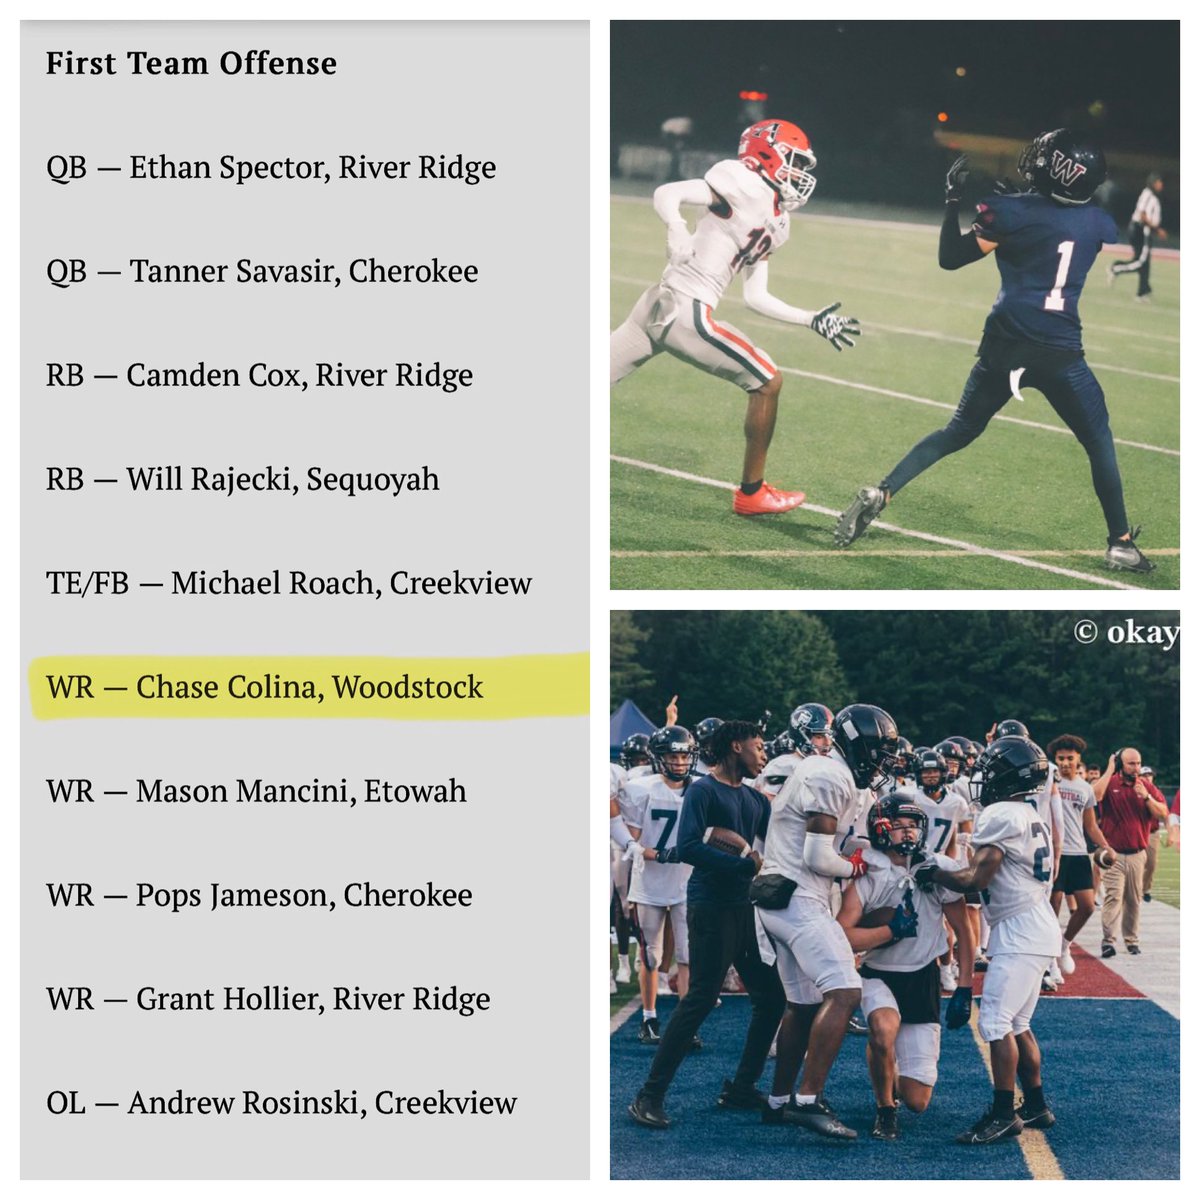 Honored & Blessed to be awarded 1st Team All Cherokee County. Thankful for all my teammates and coaches, back to work 🙏🏼🏈 #FOE @RecruitGeorgia @GeorgiaPrepMag @NwGaFootball @NGASportsNet @turdfurgesonrpt @WoodstockFtball